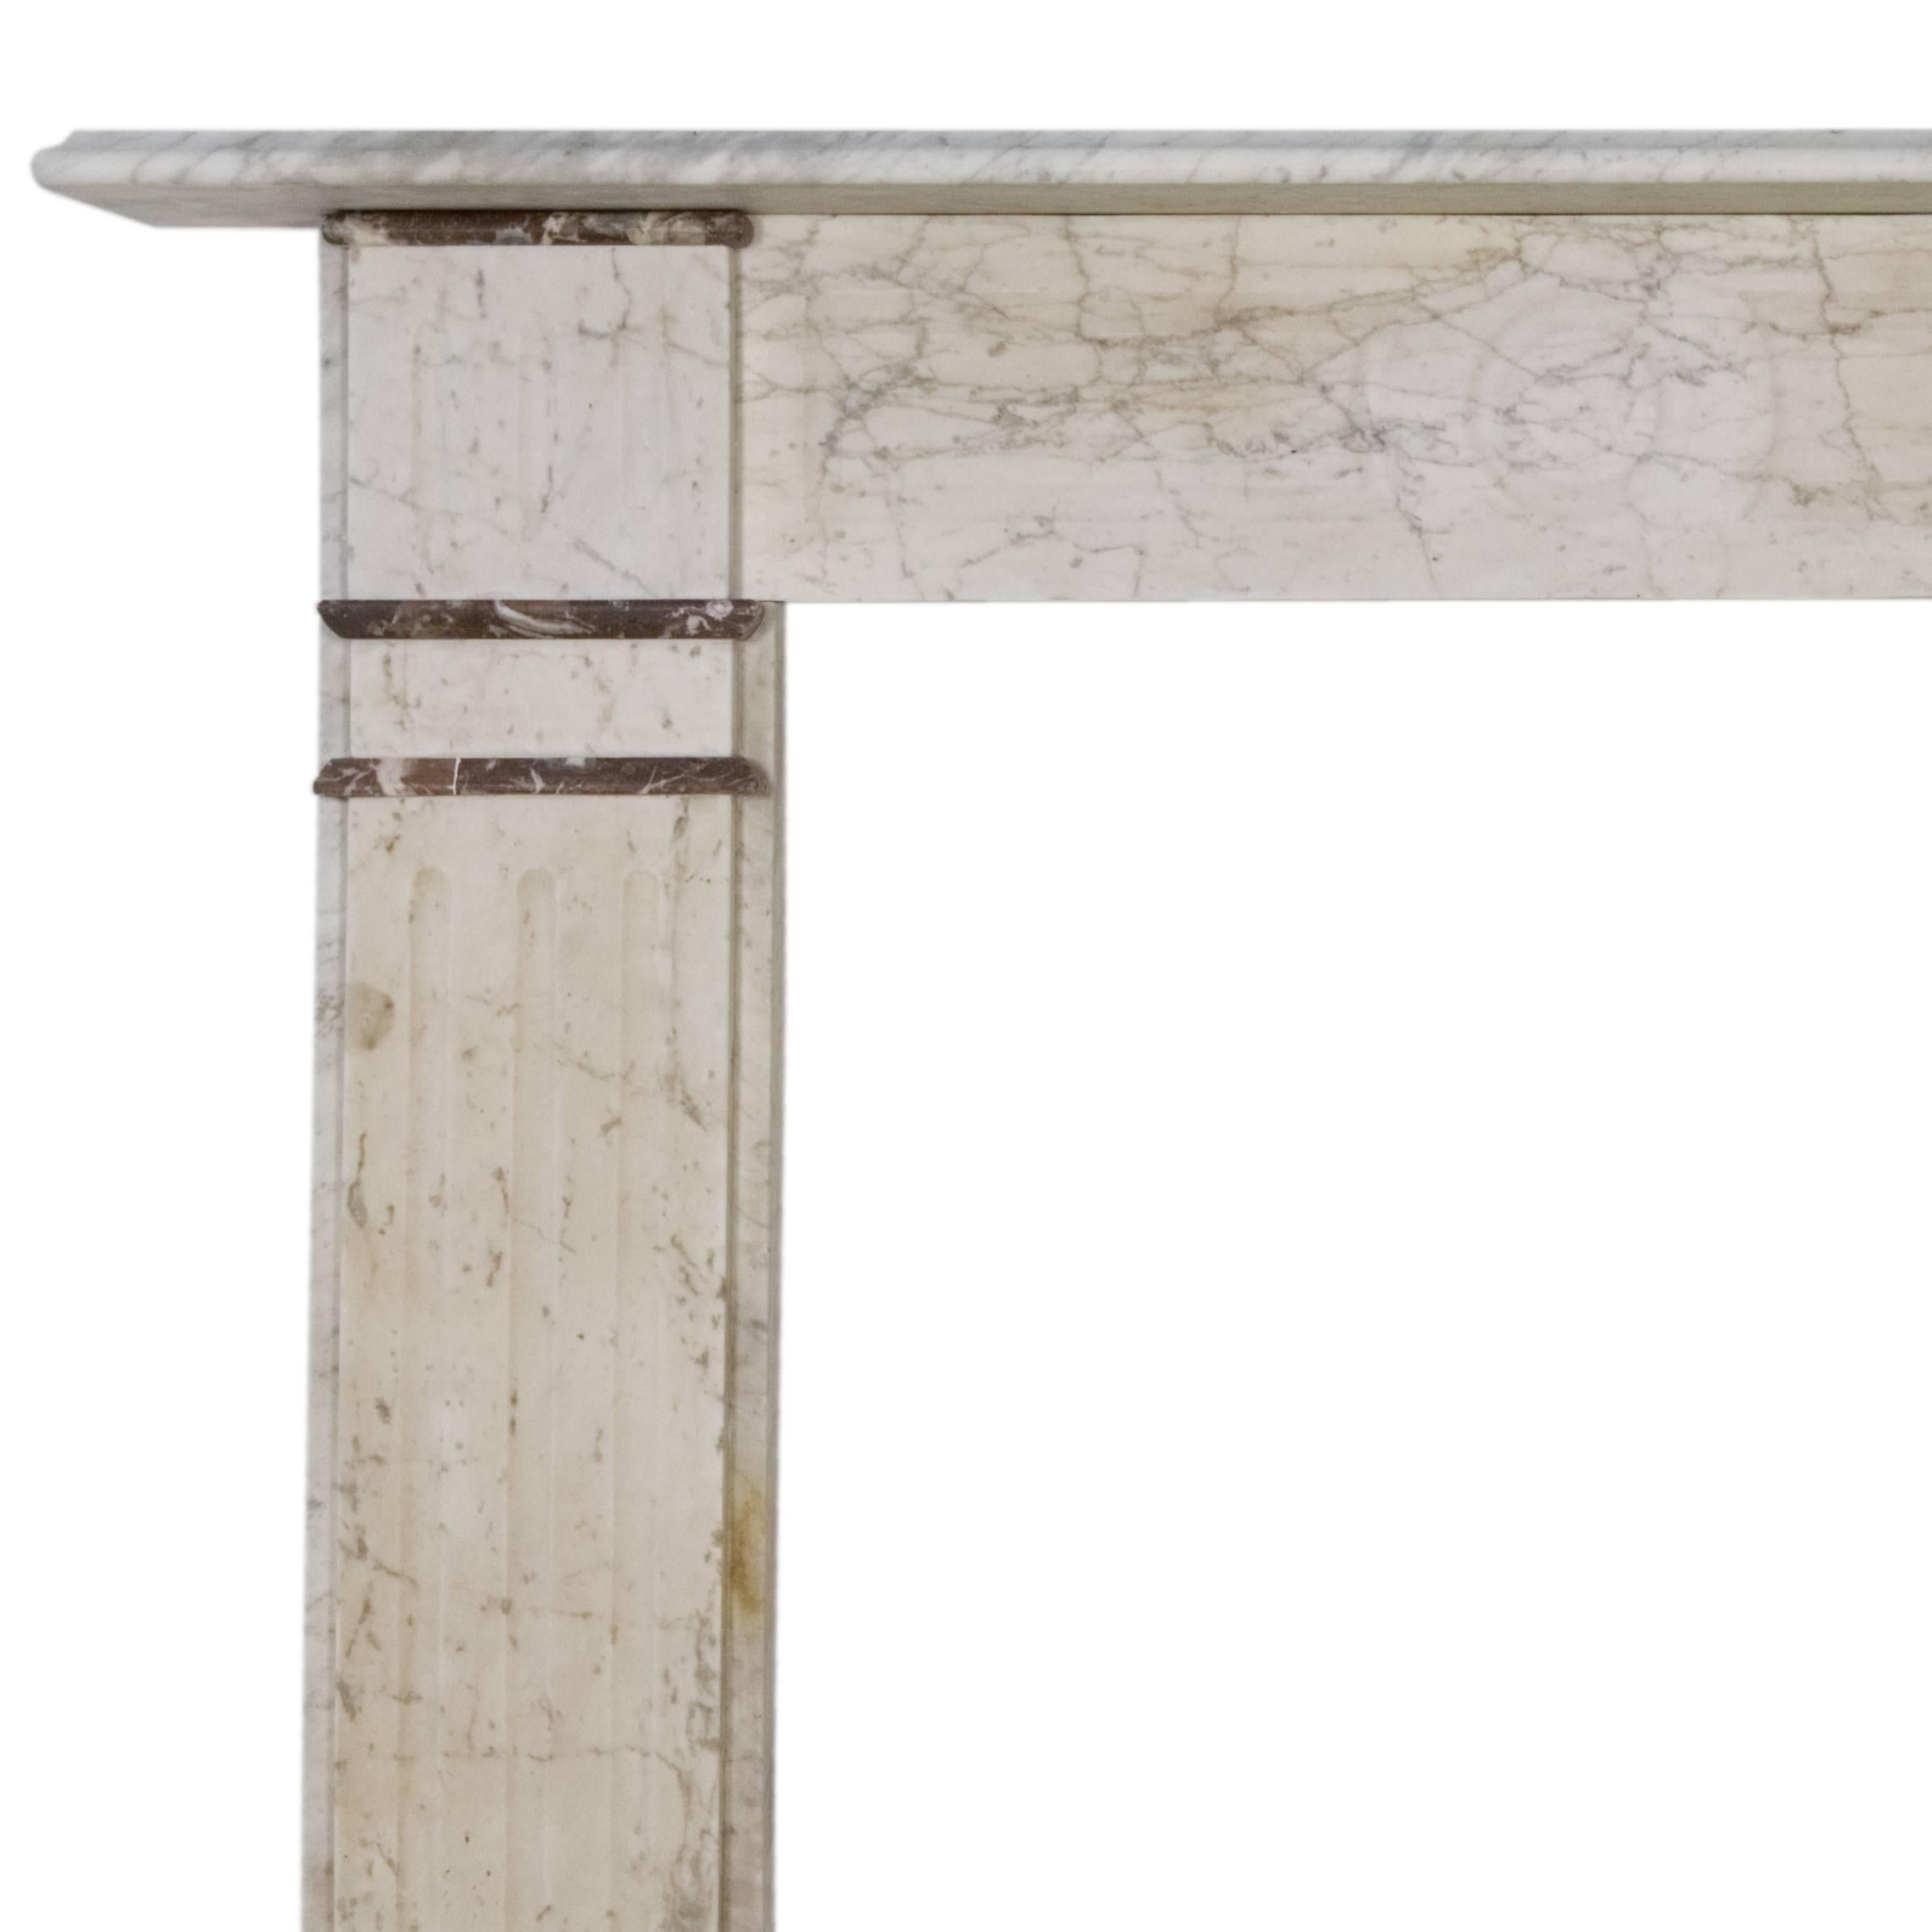 19th century English Victorian marble fireplace surround with fluted legs.
Slight smoke stains which is reflected in price.

Shelf width 56 3/4